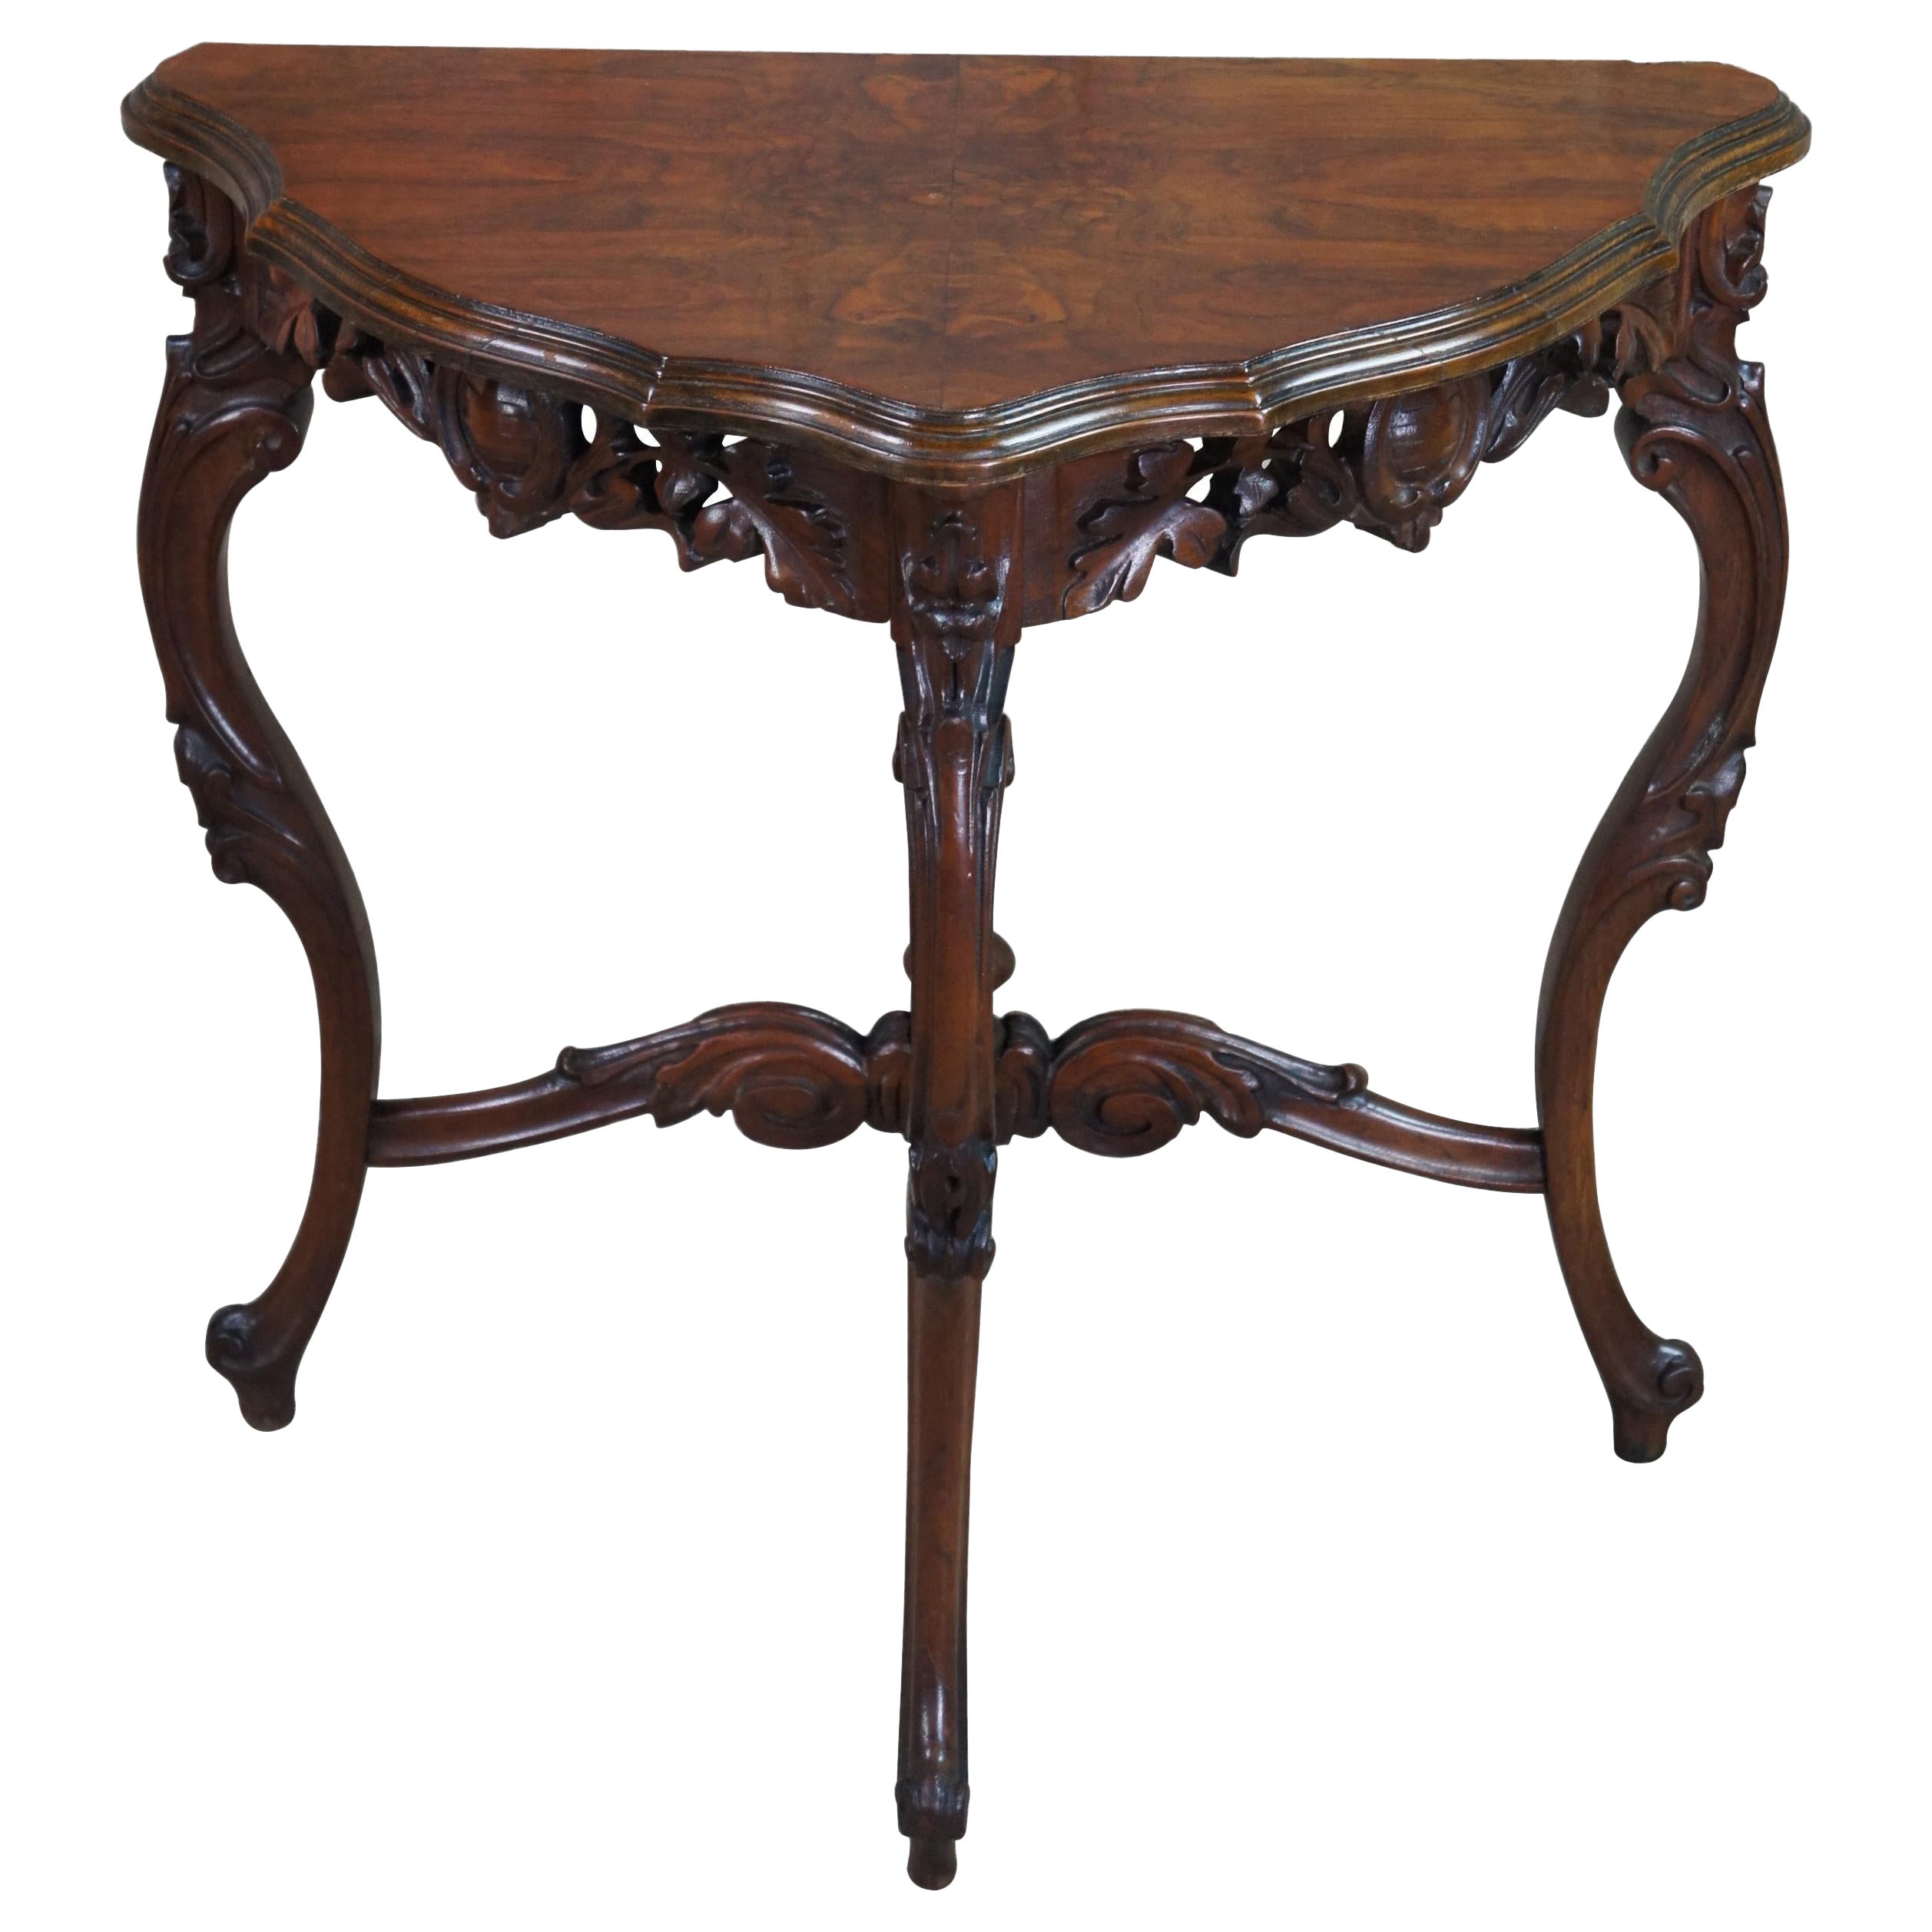 Antique French Baroque Rococo Carved Demilune Walnut Burl Console Hall Table